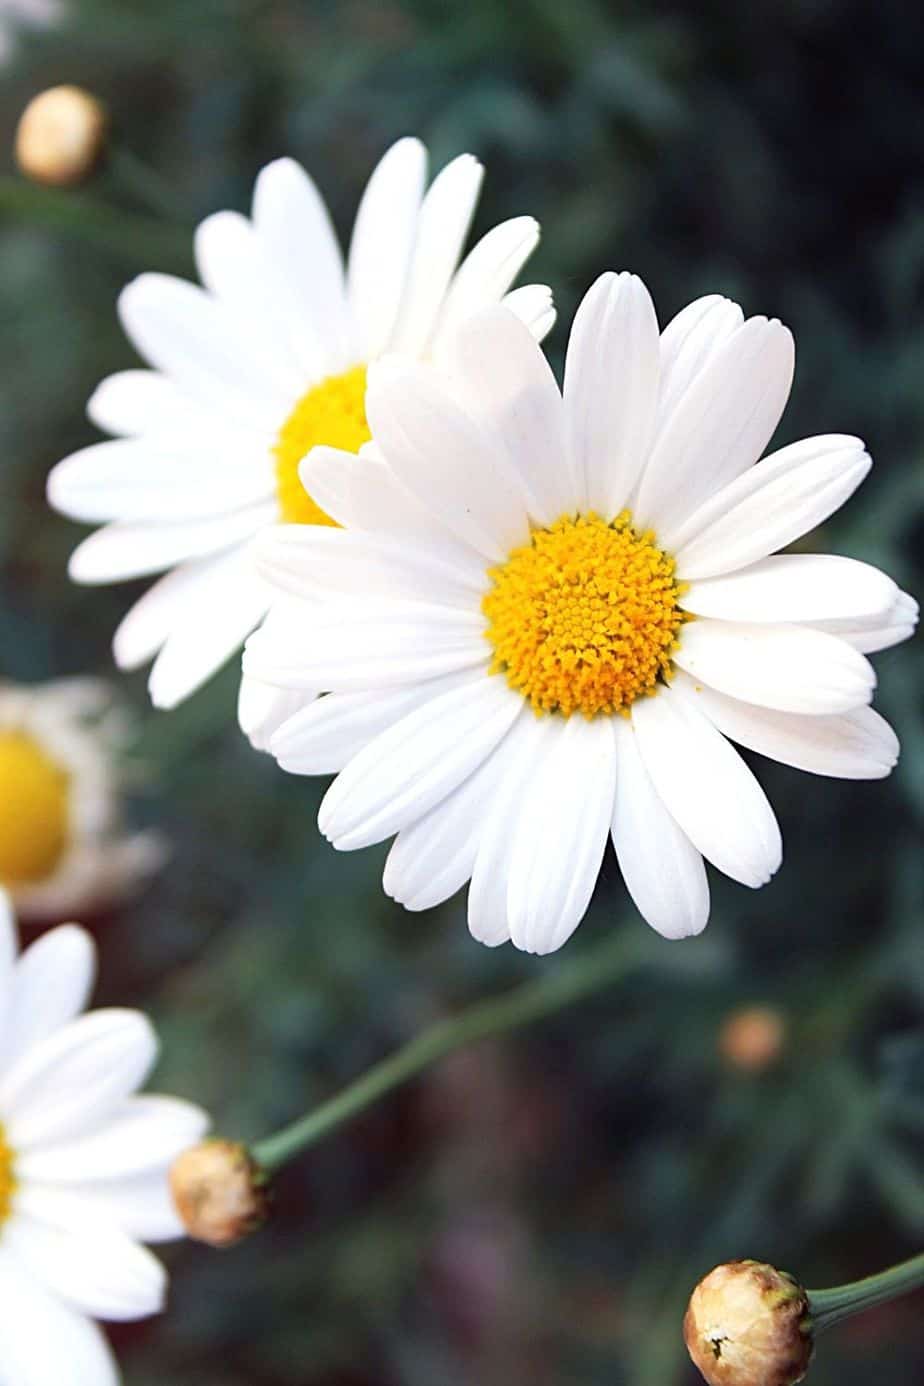 If your looking for another relaxing plant to add to your southeast facing garden, plant Chamomile